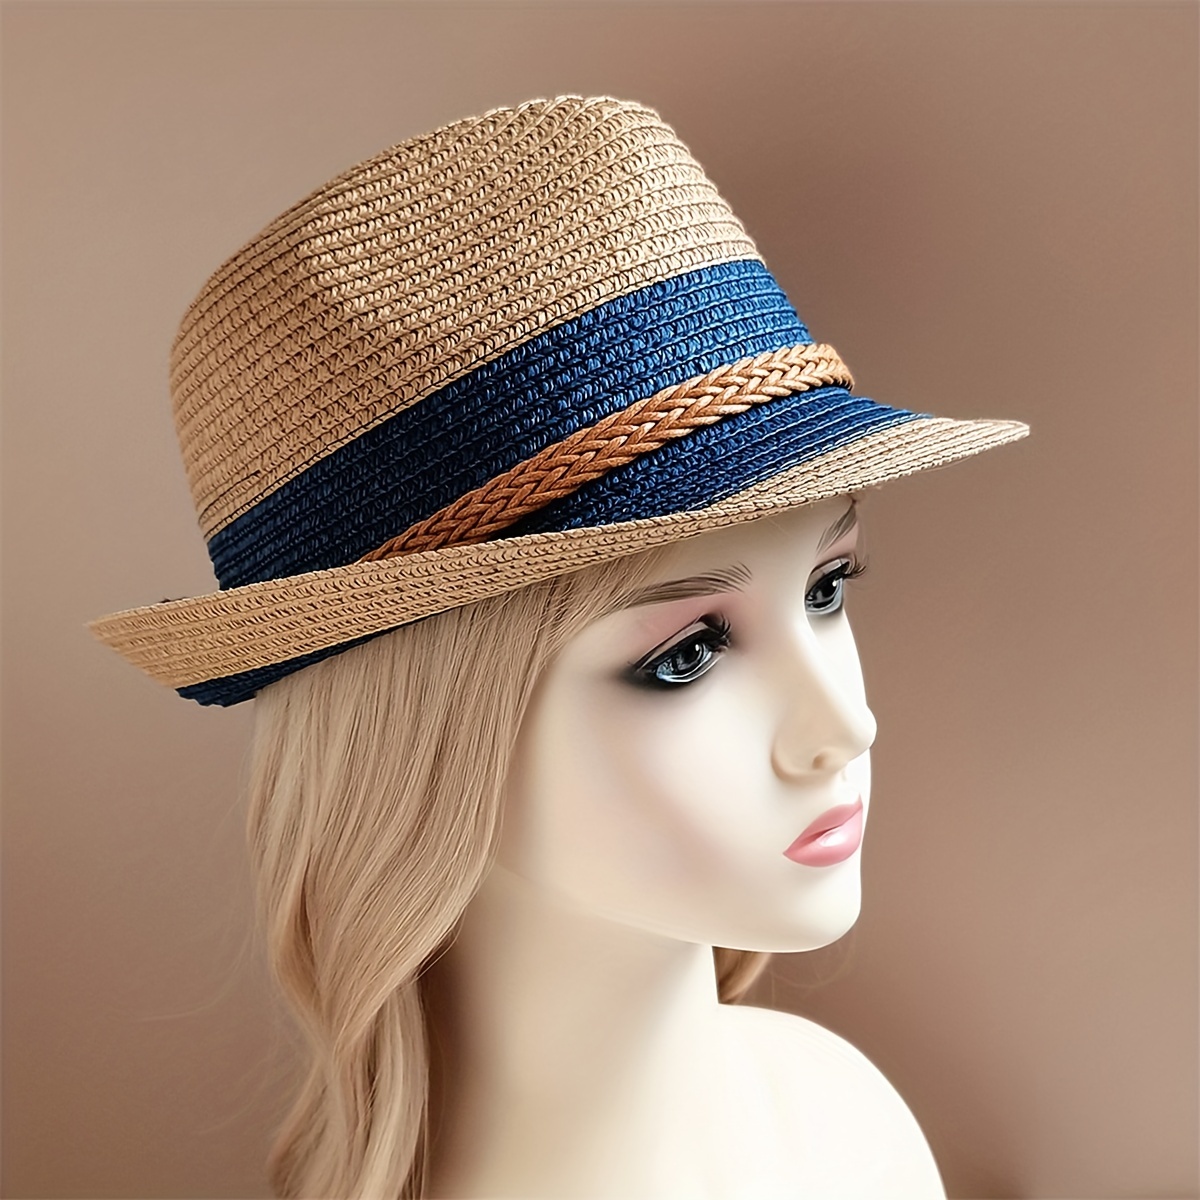 

Unisex Sun Protection Straw Hat For Beach And Outdoor Activities - Stylish And Comfortable Travel Hat For Men And Women